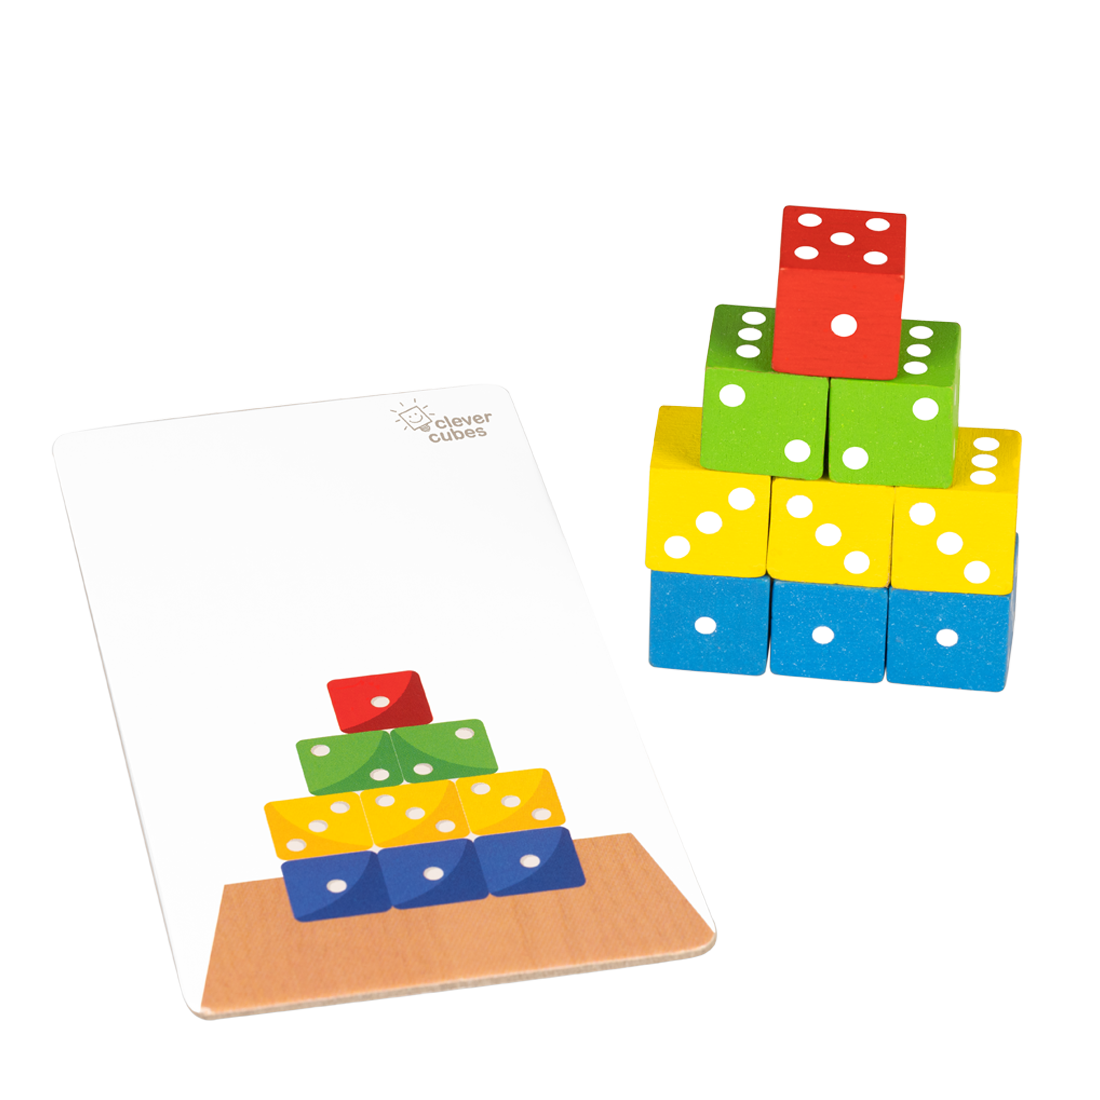 Dice Tower Game for kids